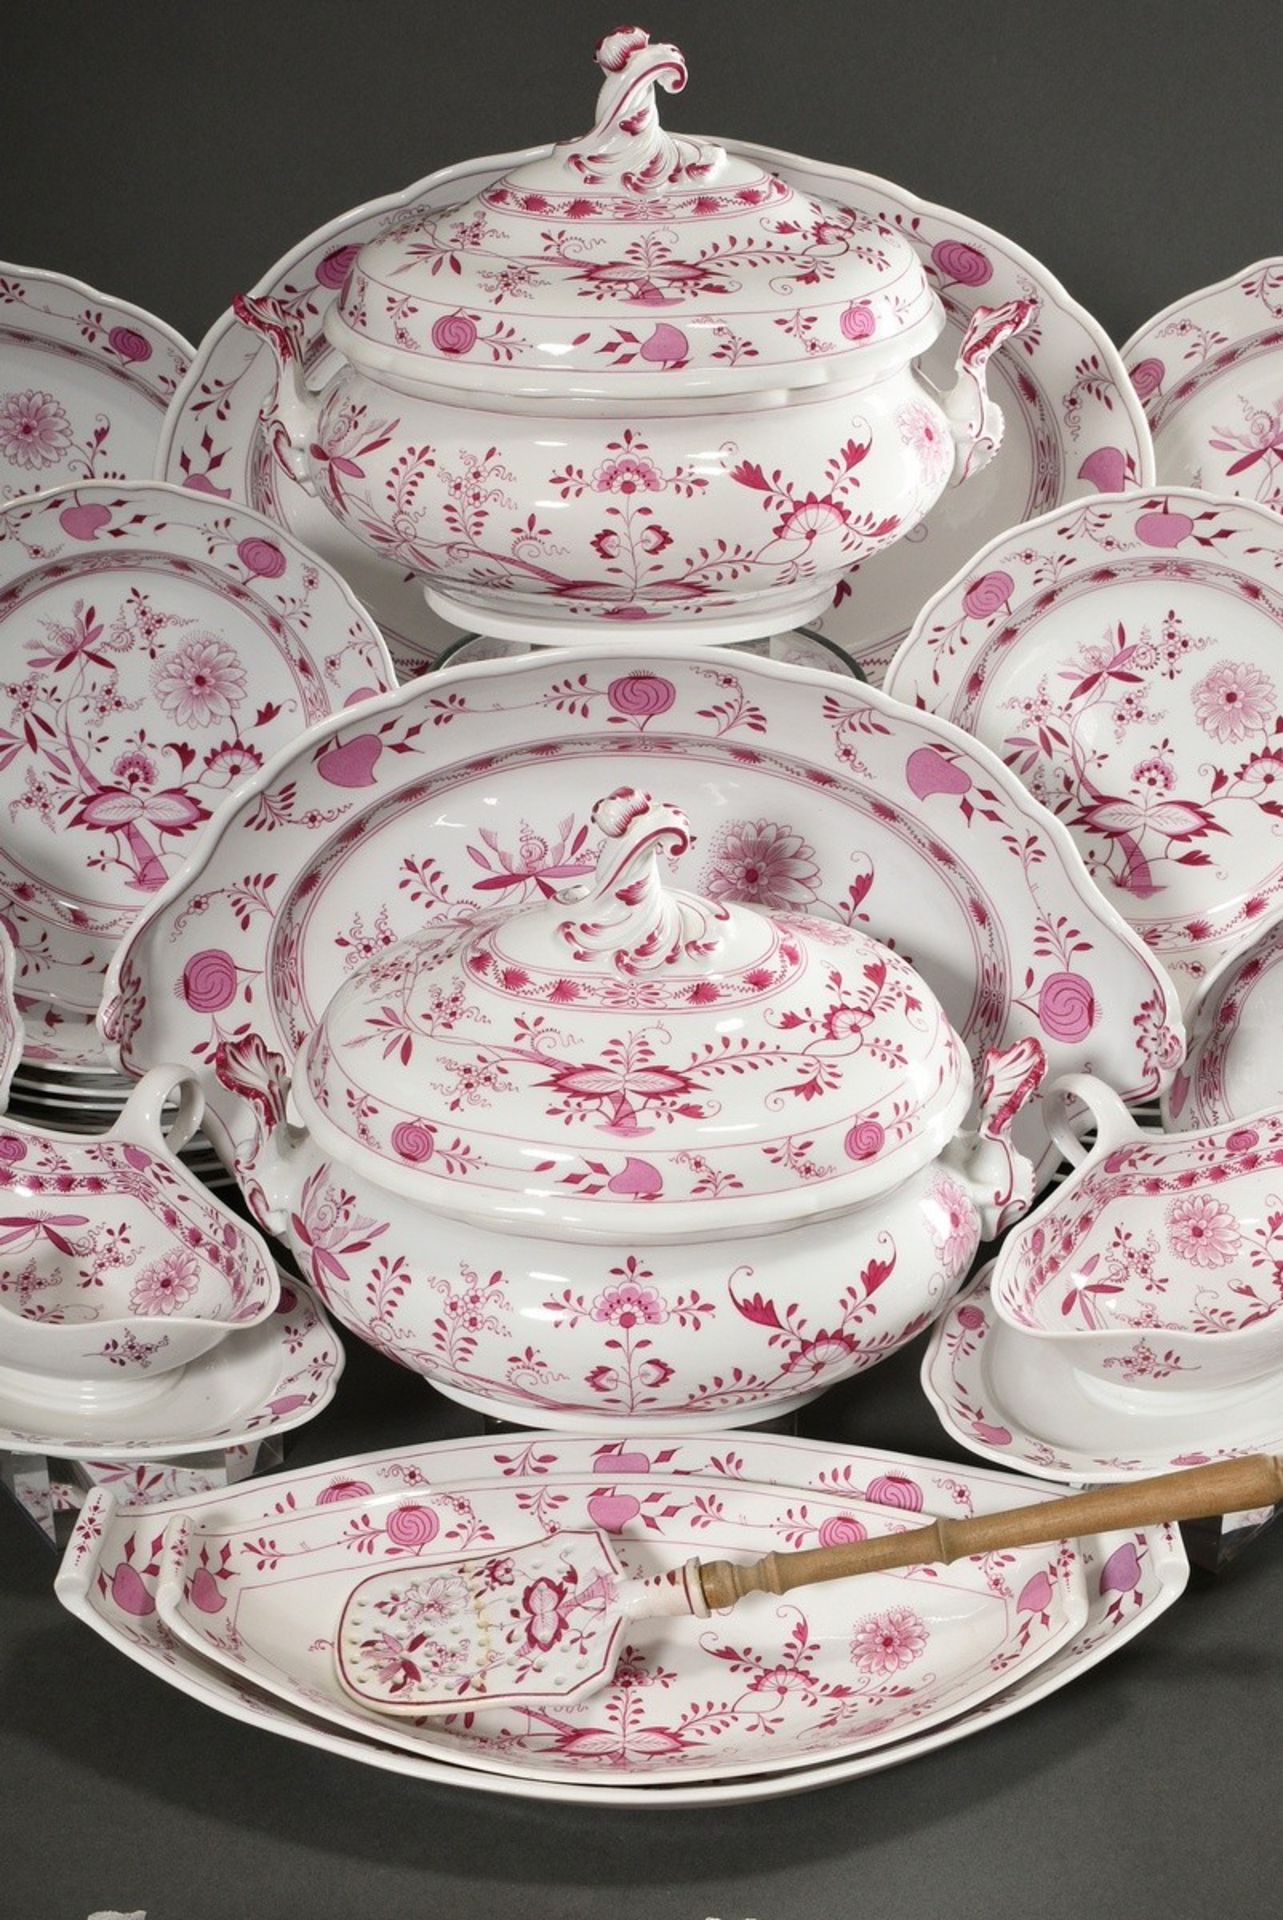 65 Pieces rare Meissen dinner service "Zwiebelmuster Pink", custom made around 1900, consisting of: - Image 5 of 27